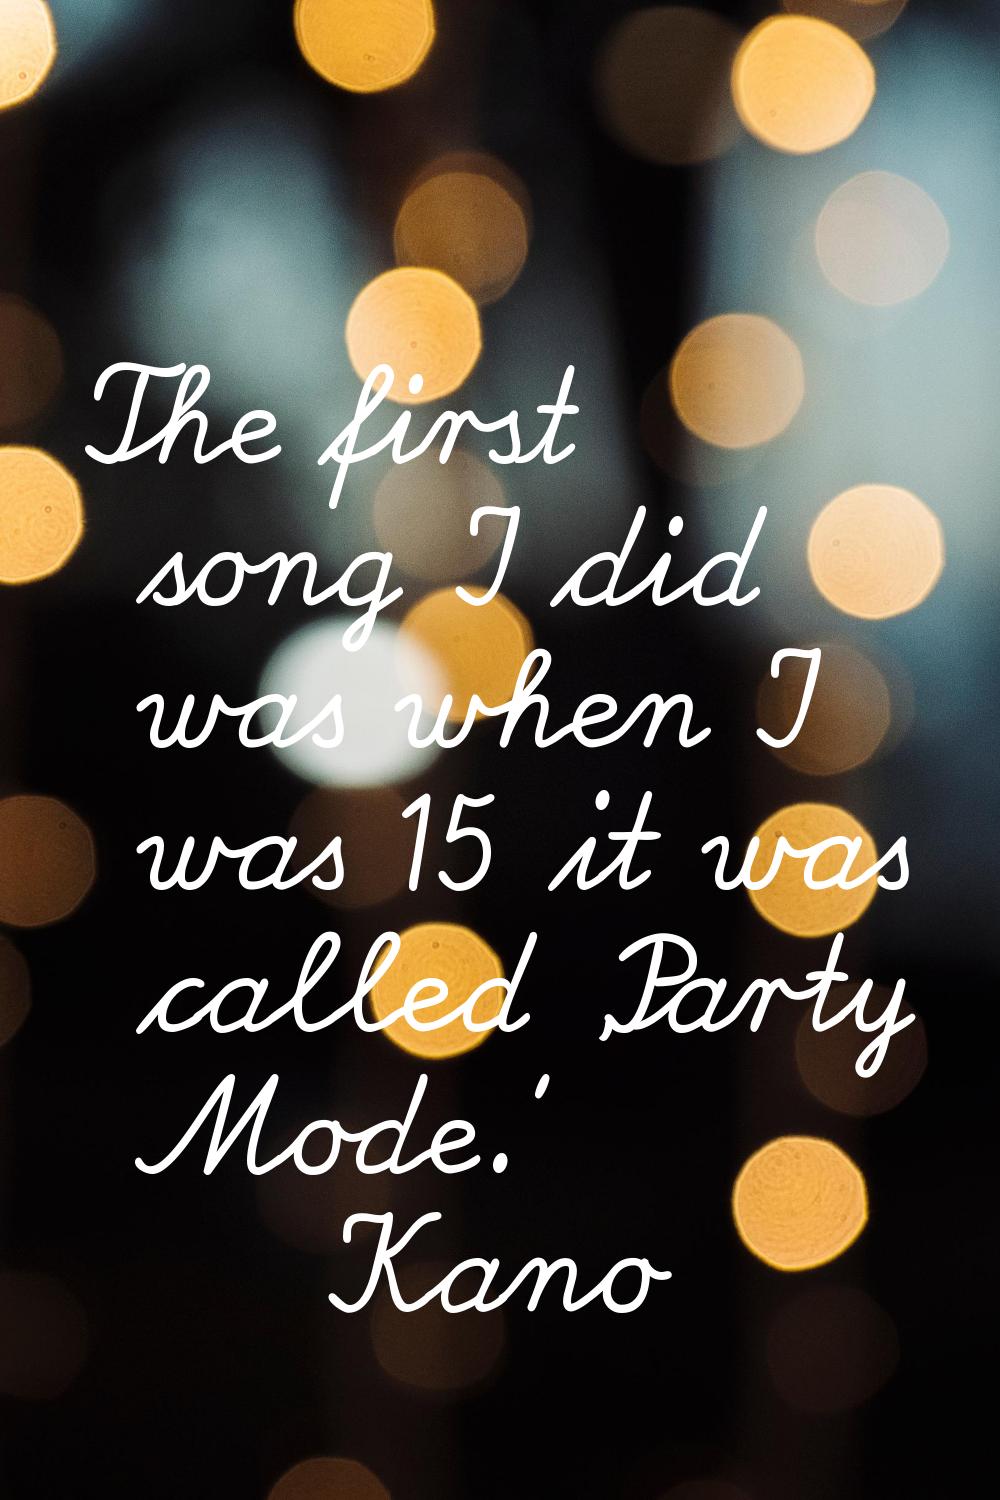 The first song I did was when I was 15 it was called 'Party Mode.'